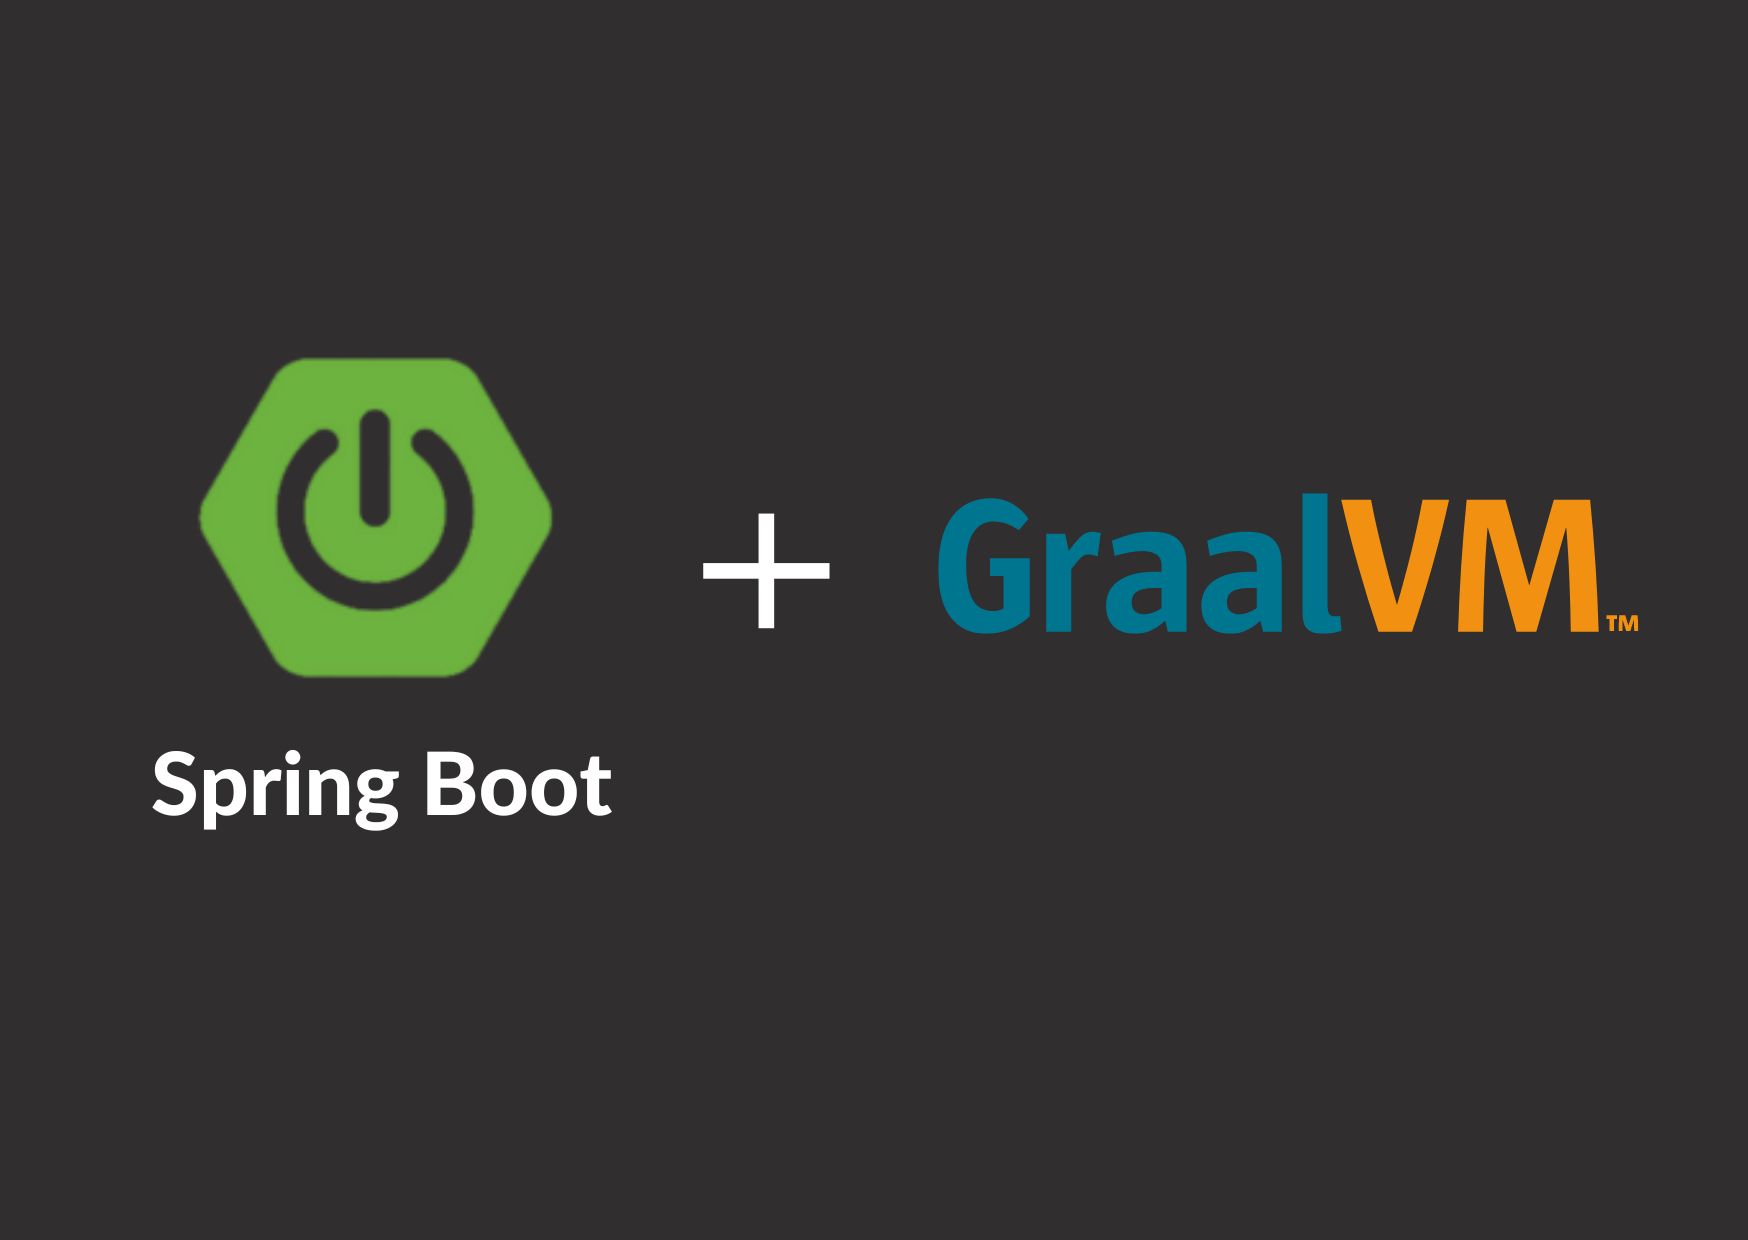 Build Native Image For A Spring Boot Application